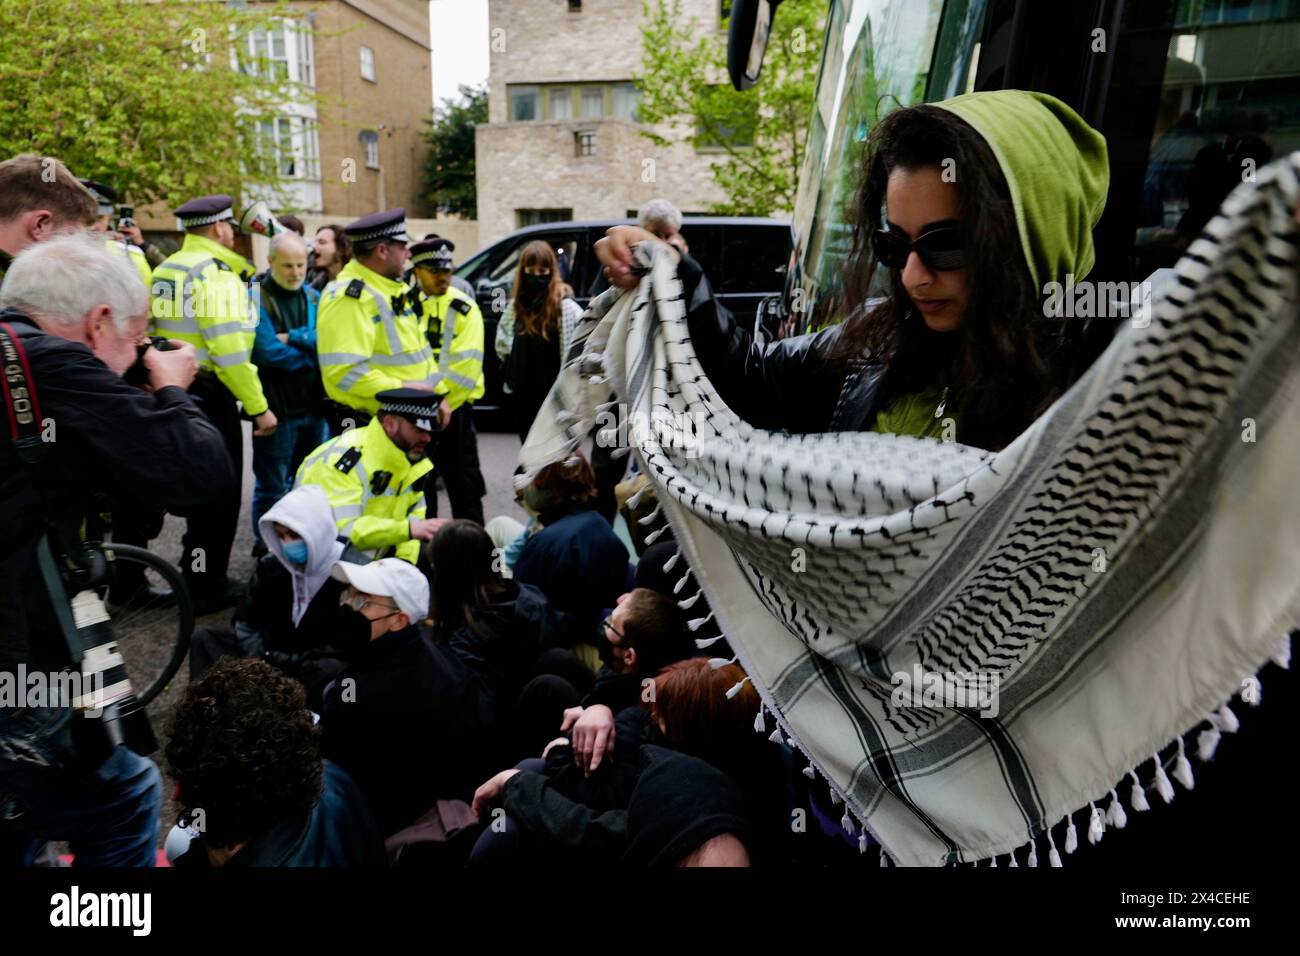 London / UK. 02 May 2024. Local residents and activists formed a blockade at the Great Western Hotel to prevent the removal of refugees to the Bibby Stockholm barge. Alamy Live News / Aubrey Fagon Stock Photo